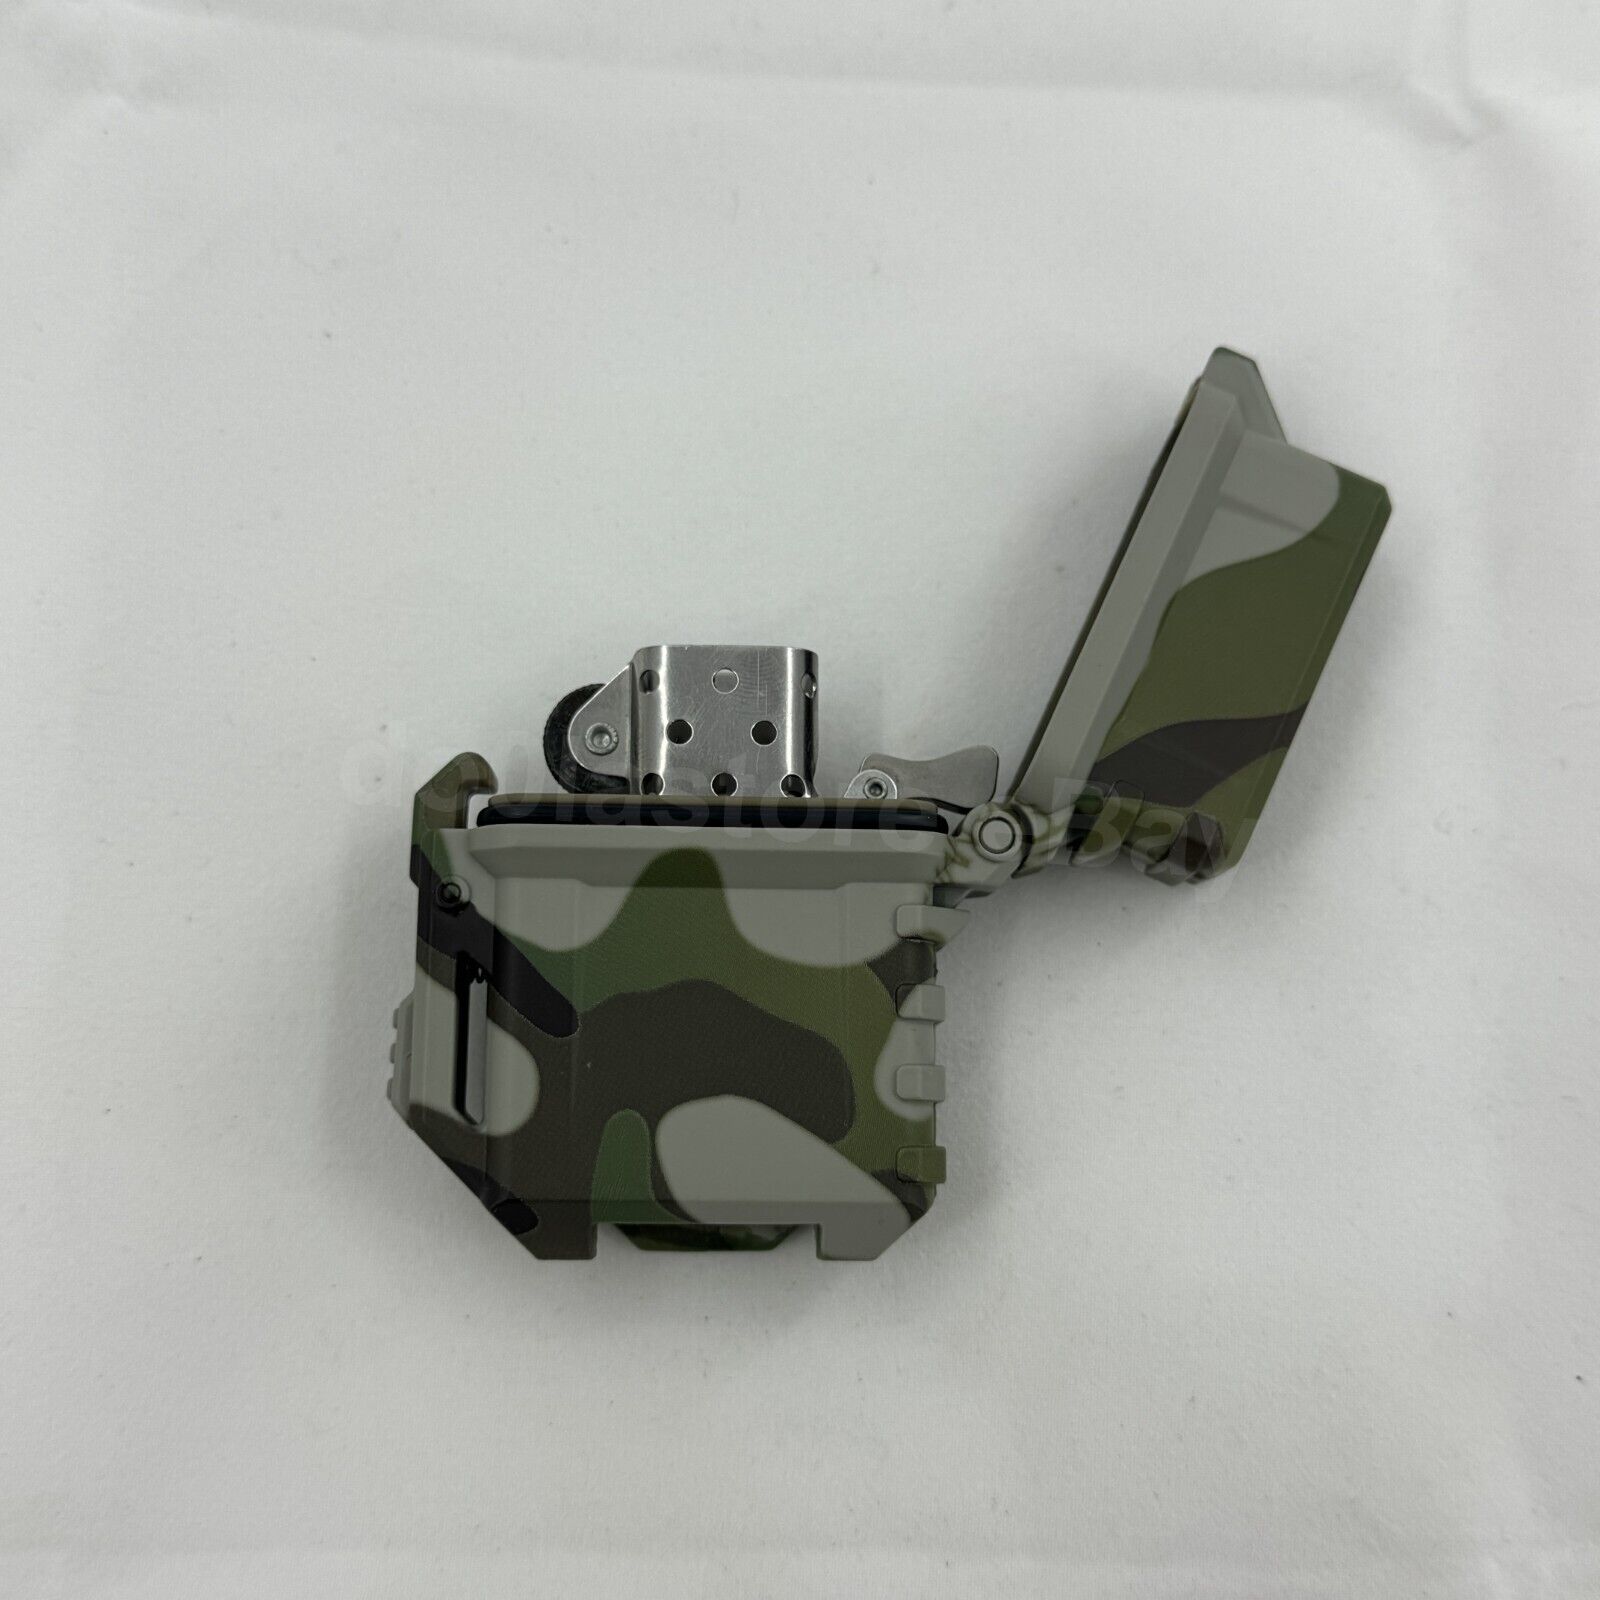 For Zippo lighter, Tactical Shell insert Case Oil Fuel Saving with Strong Holder